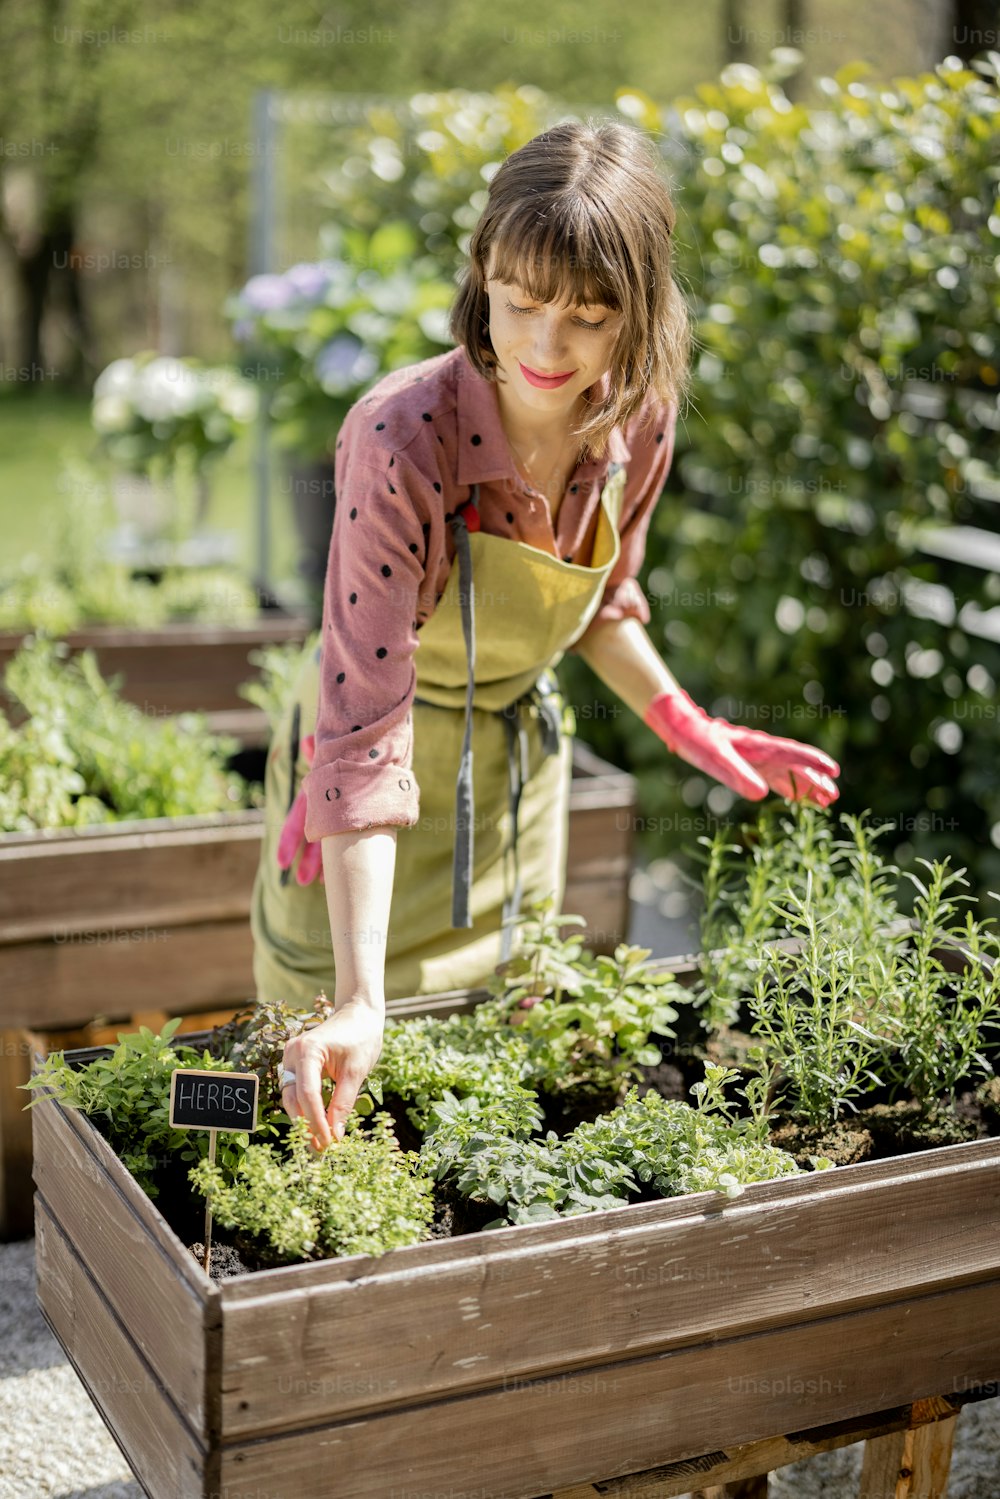 Young woman taking care of herbs growing at home vegetable garden in the backyard of country house. Concept of ecology and homegrowing